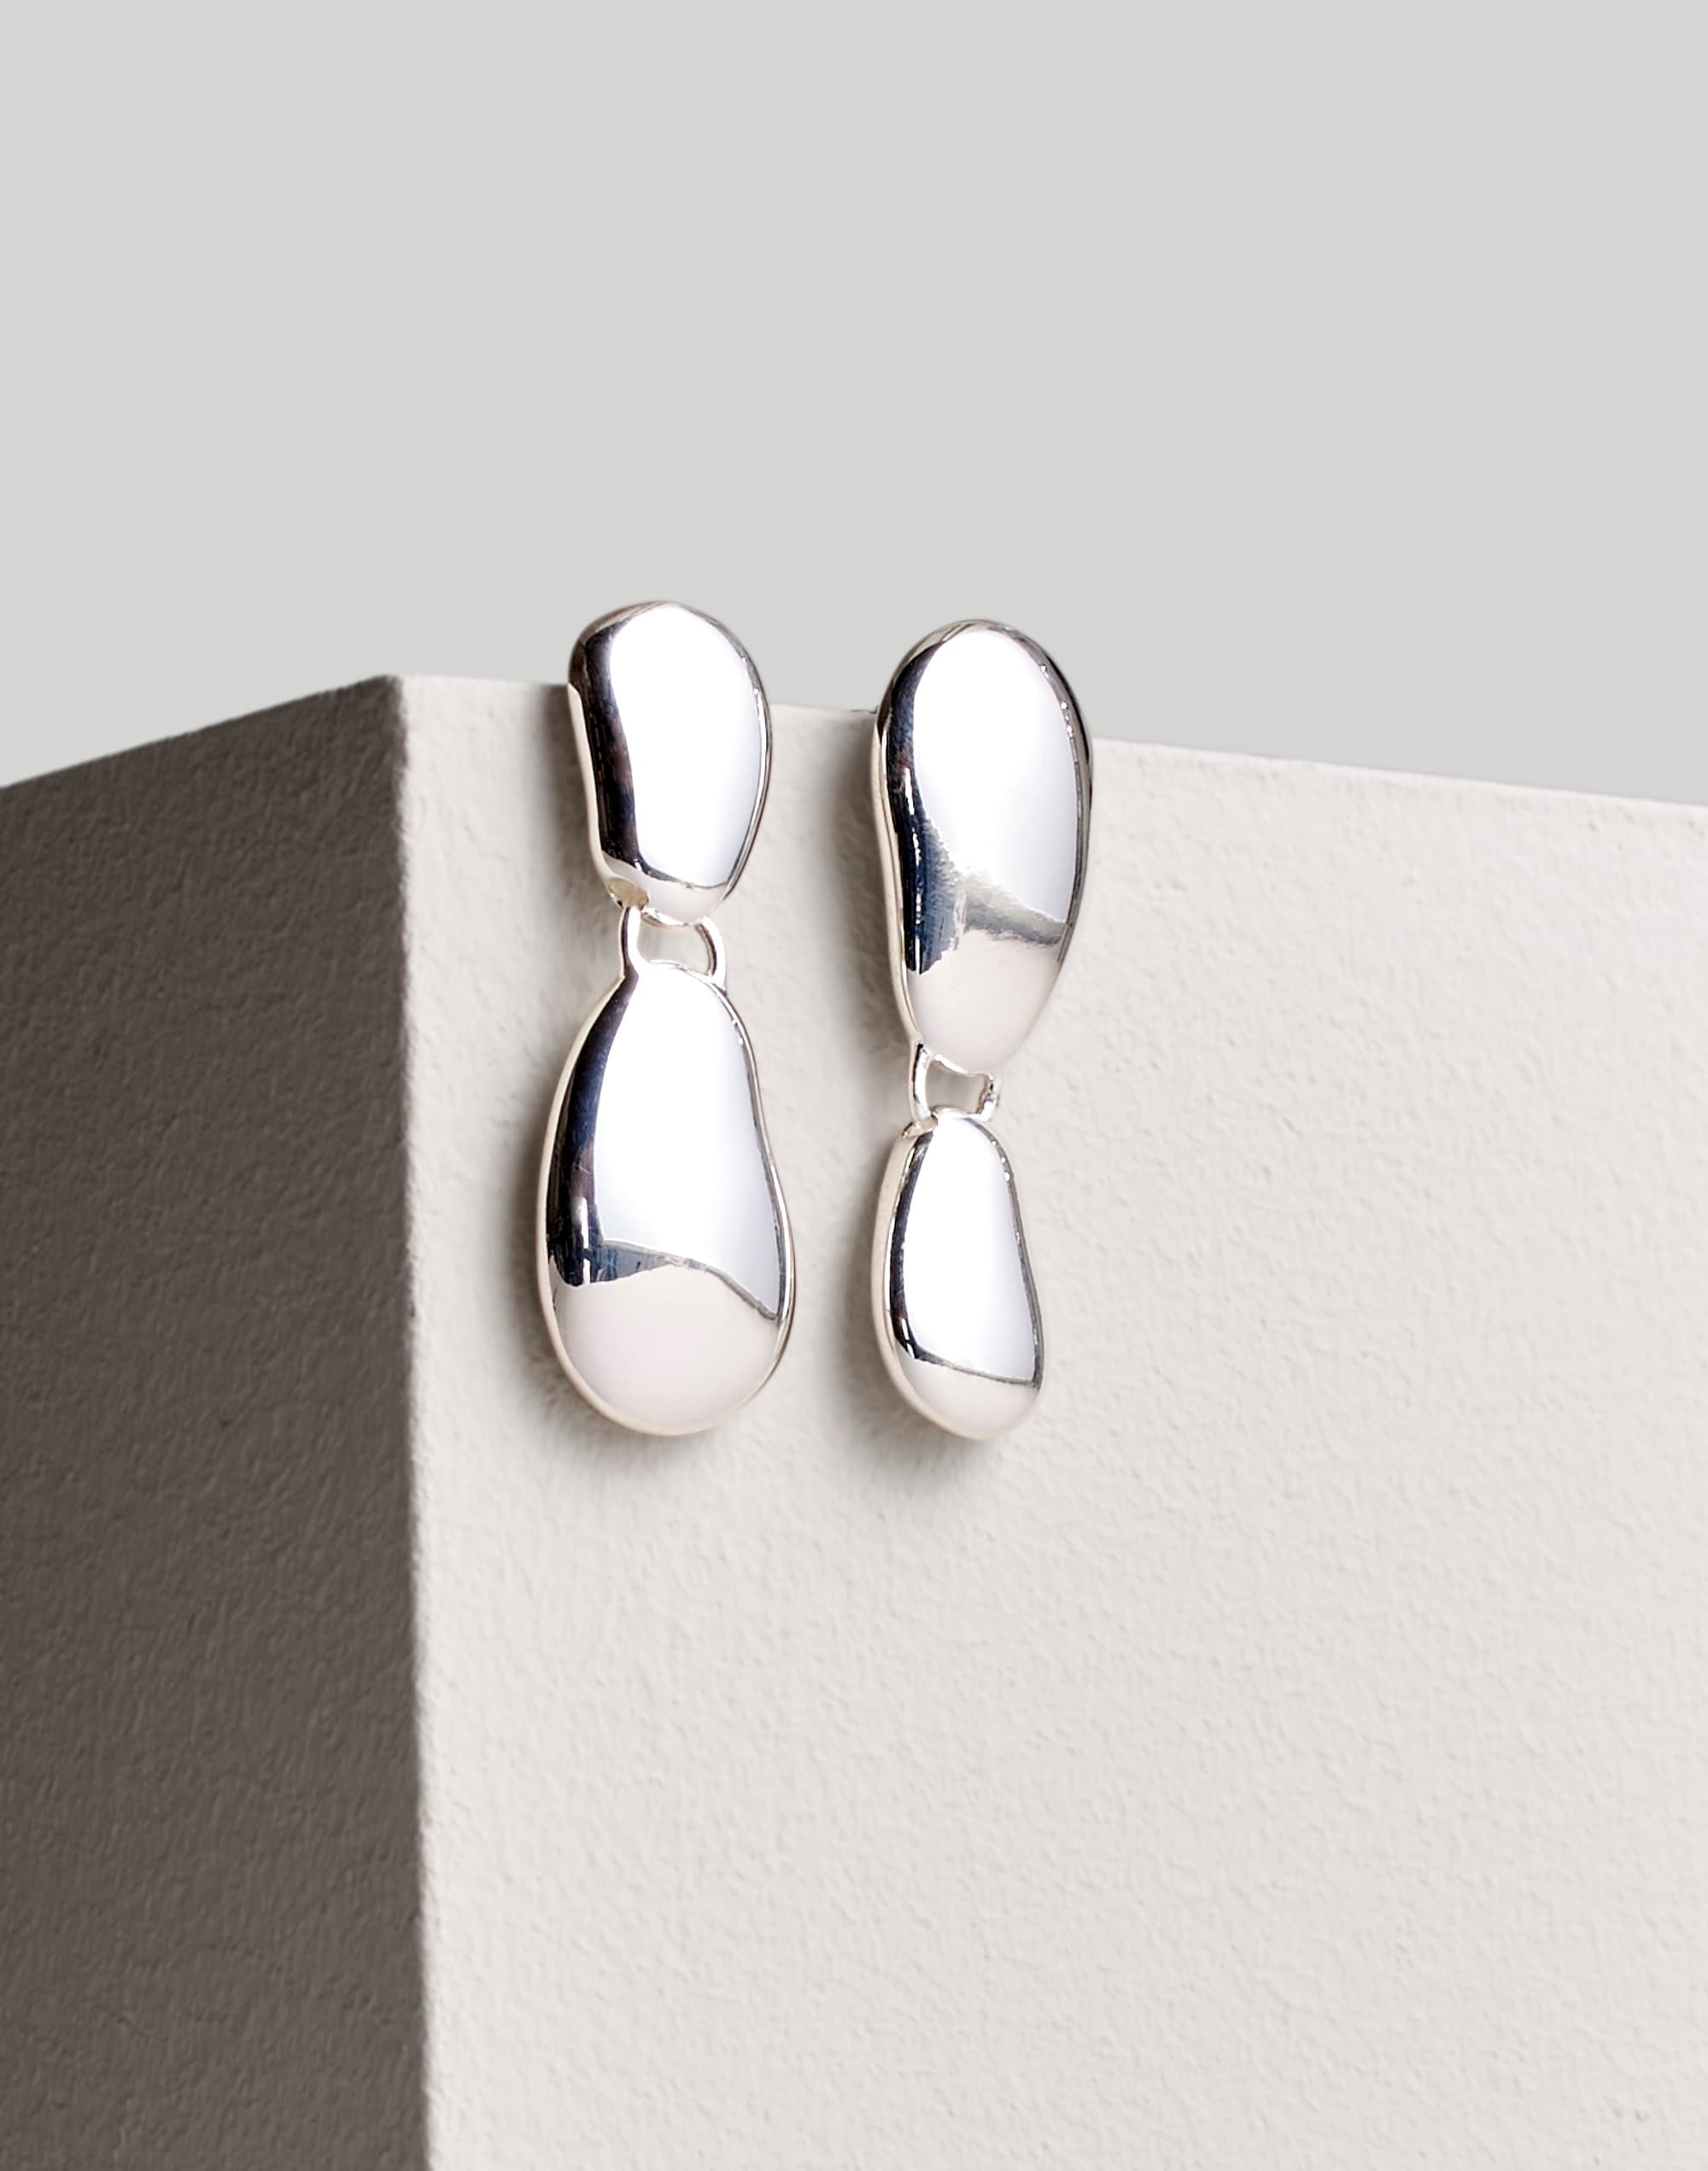 The Sterling Silver Collection Statement Drop Earrings